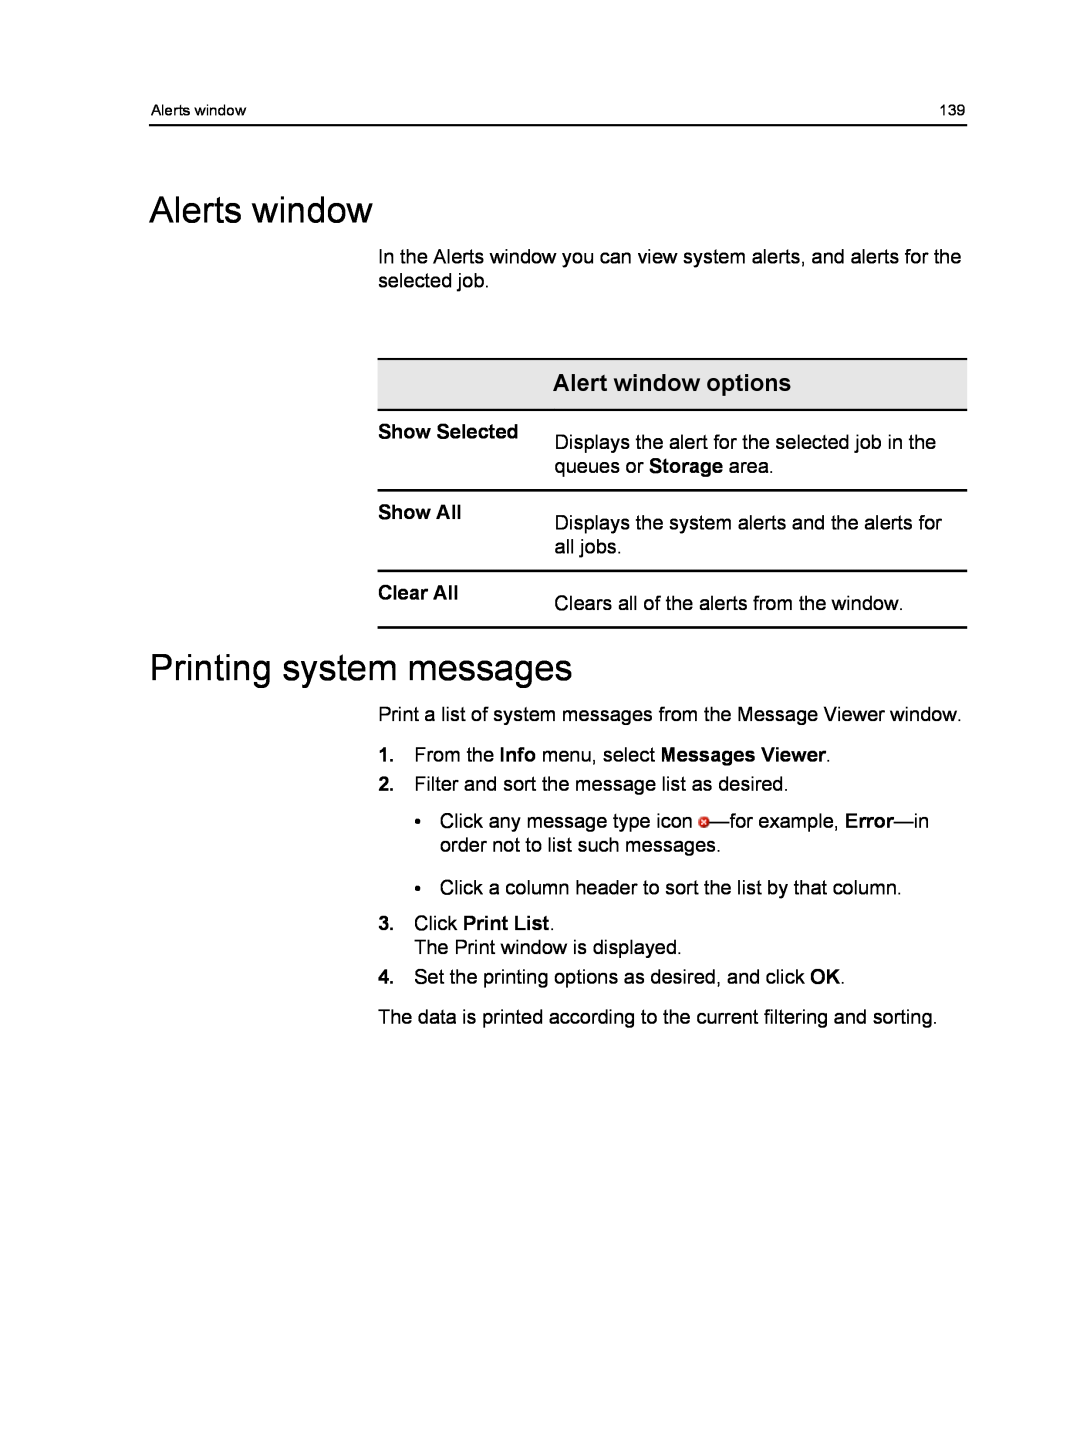 Xerox 550, 560 manual Alerts window, Printing system messages, Alert window options, Show Selected, Show All, Clear All 